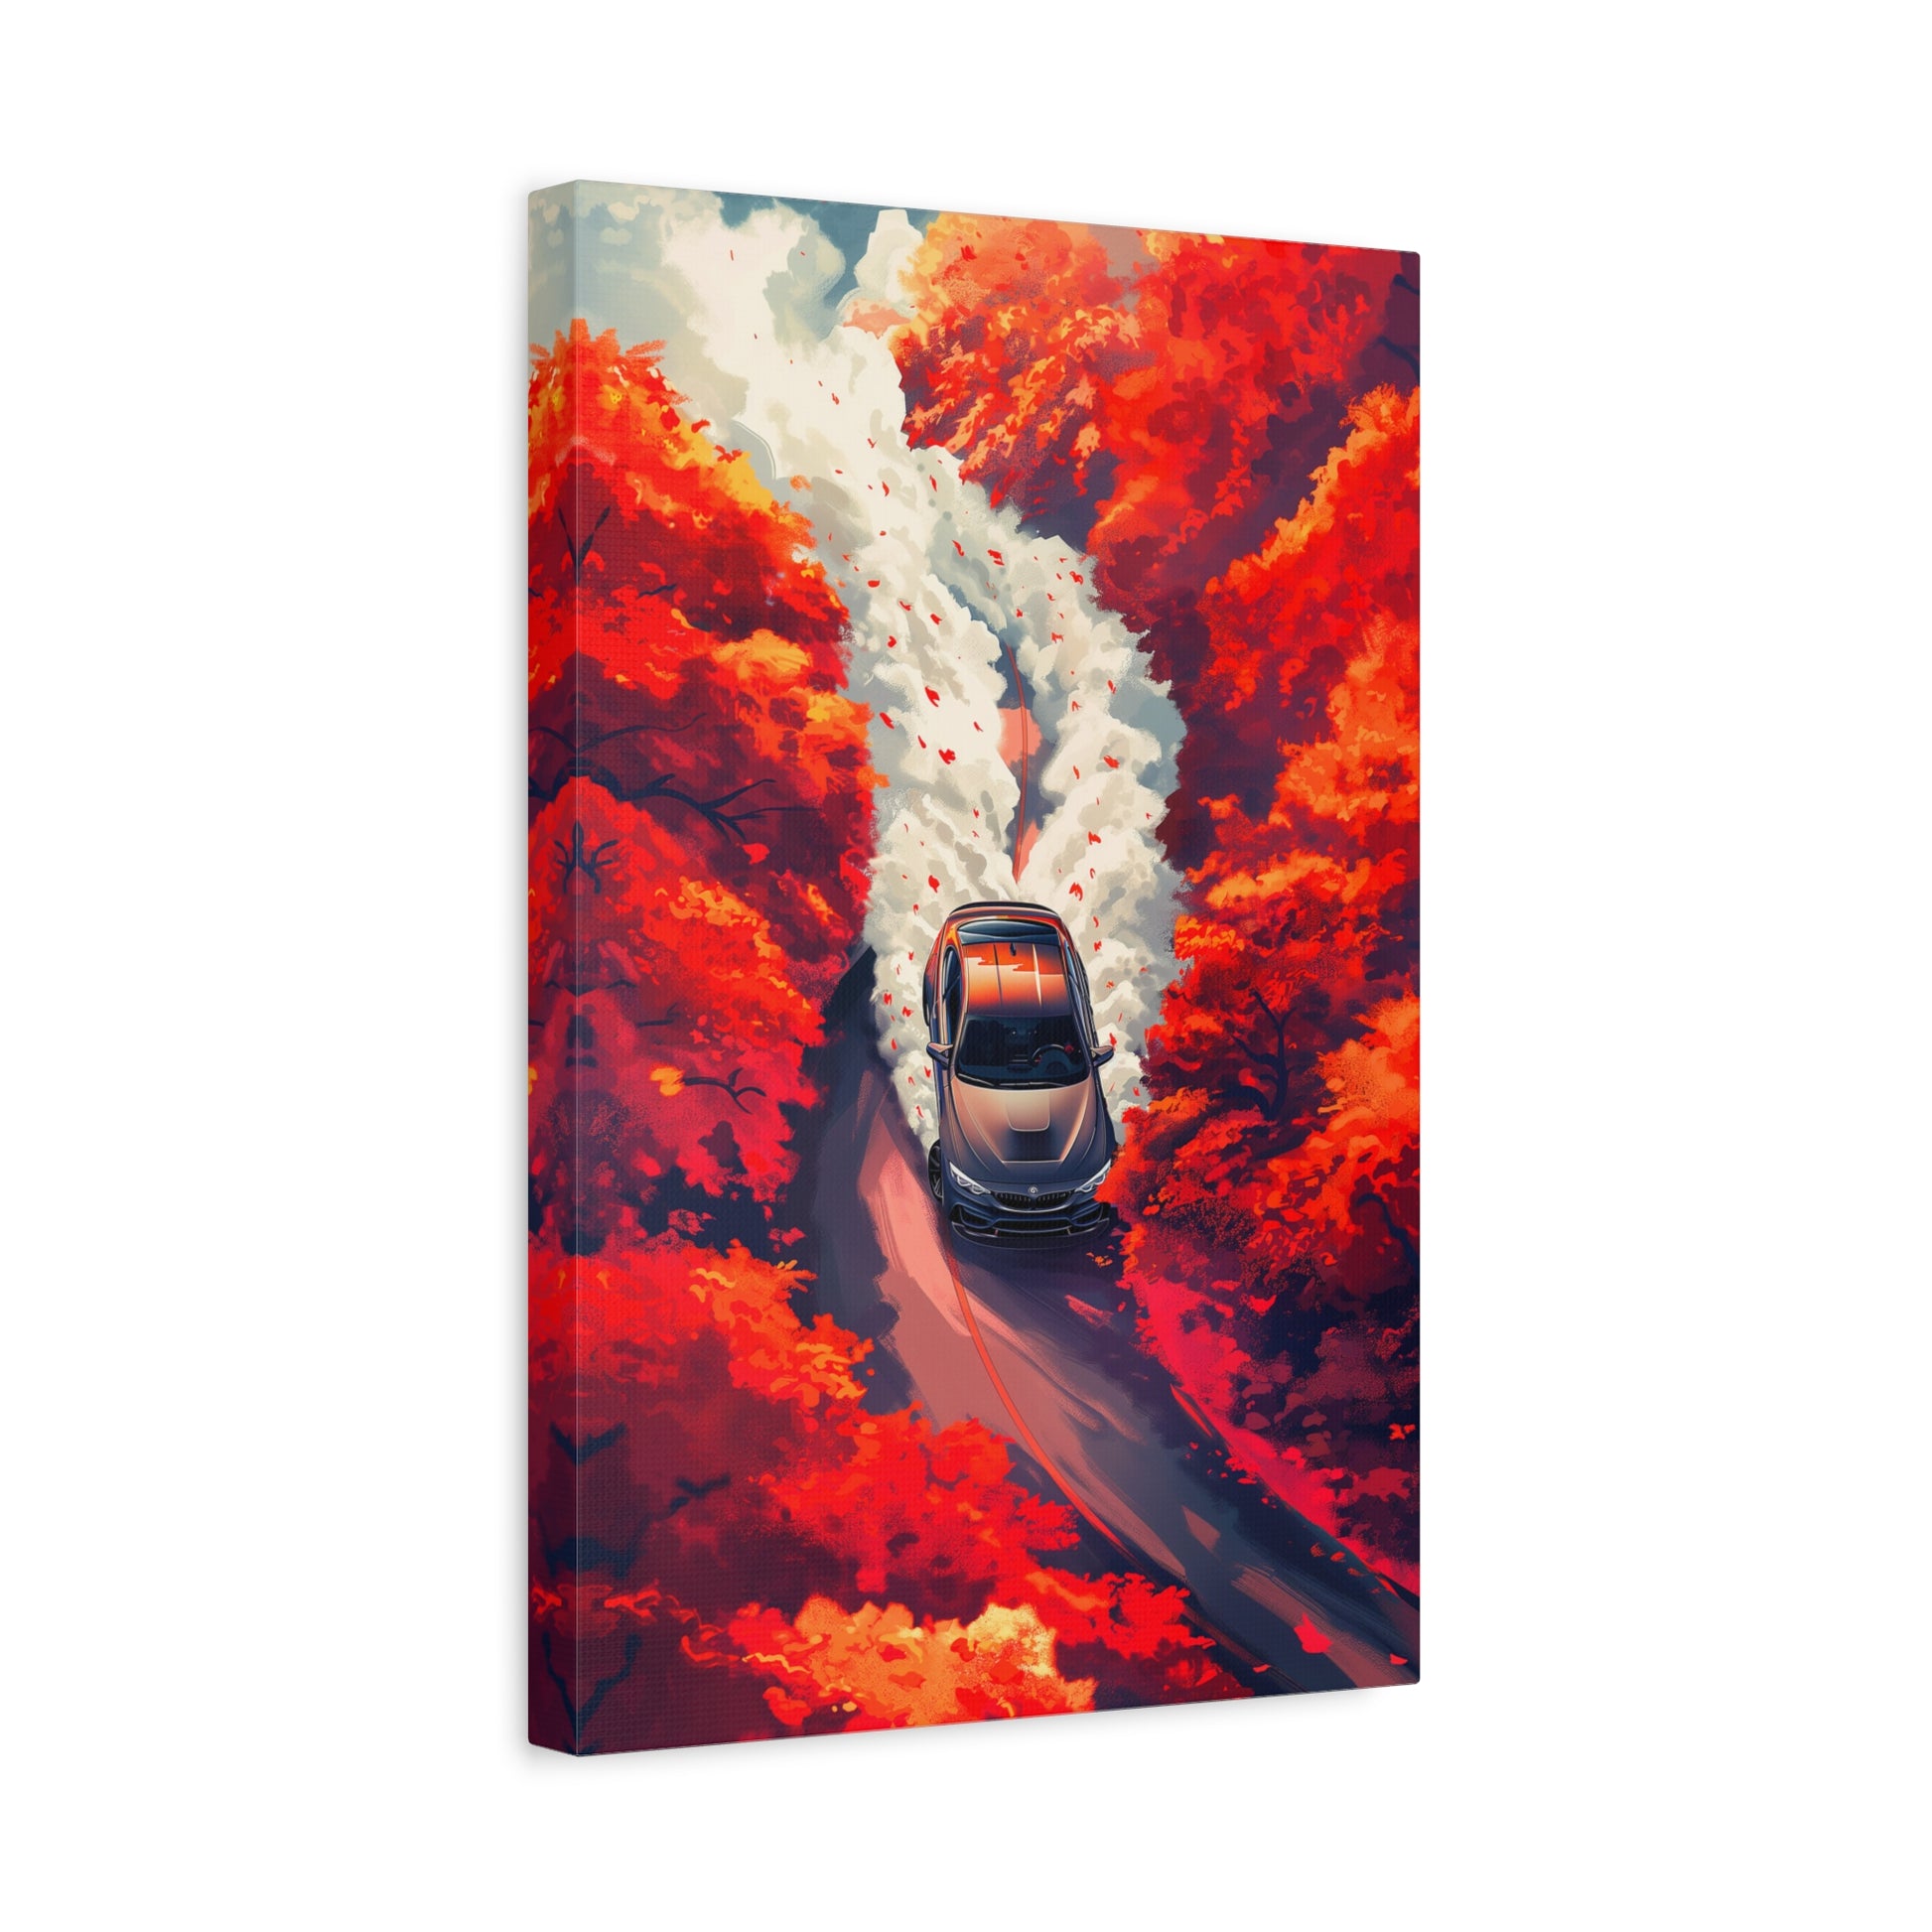 Autumn Drive (Canvas)A drift car journey through a fiery autumnal forest on canvas prints. Shop now for innovative products designed to enhance your digital lifestyle. Fast shipping!RimaGallery